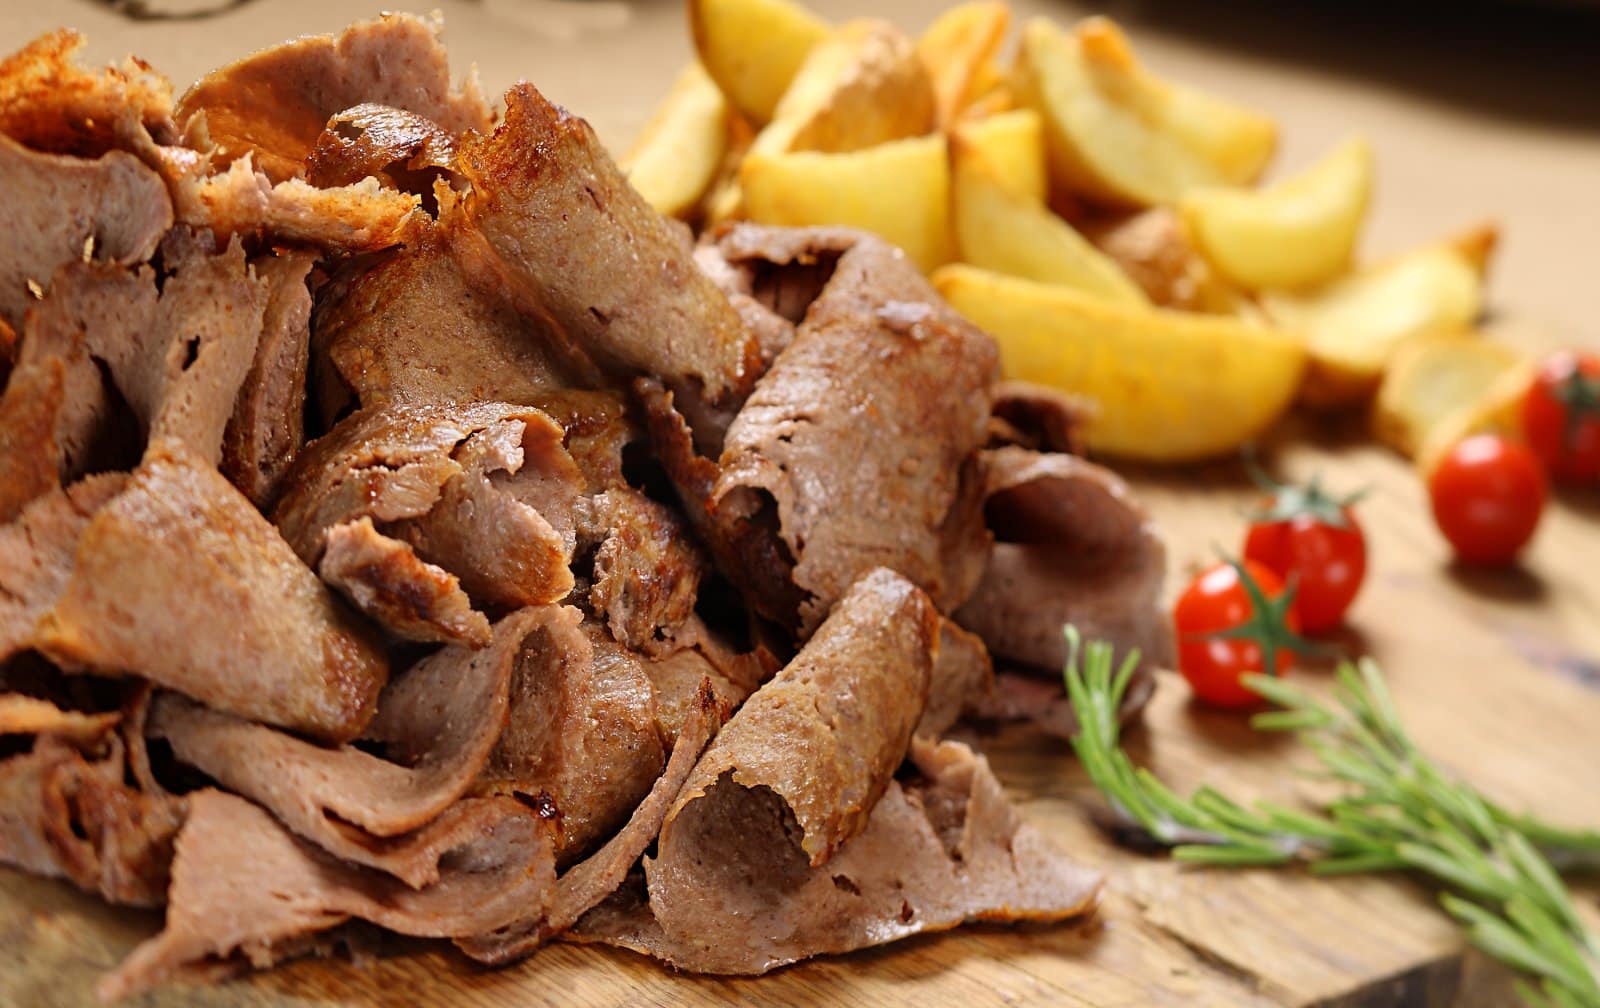 <p class="wp-caption-text">Image Credit: Shutterstock / Prenes</p>  <p><span>The kebab, with its origins deeply rooted in Middle Eastern and Turkish cuisines, is a staple dish in Istanbul, offering a variety of meats cooked on skewers or as doner kebabs. Istanbul’s culinary scene provides various kebab experiences, from street food vendors to upscale restaurants. Sultanahmet Kebab House and Dürümzade are renowned for their authentic flavors and traditional preparation methods, offering visitors a genuine taste of Turkish kebab culture.</span></p>